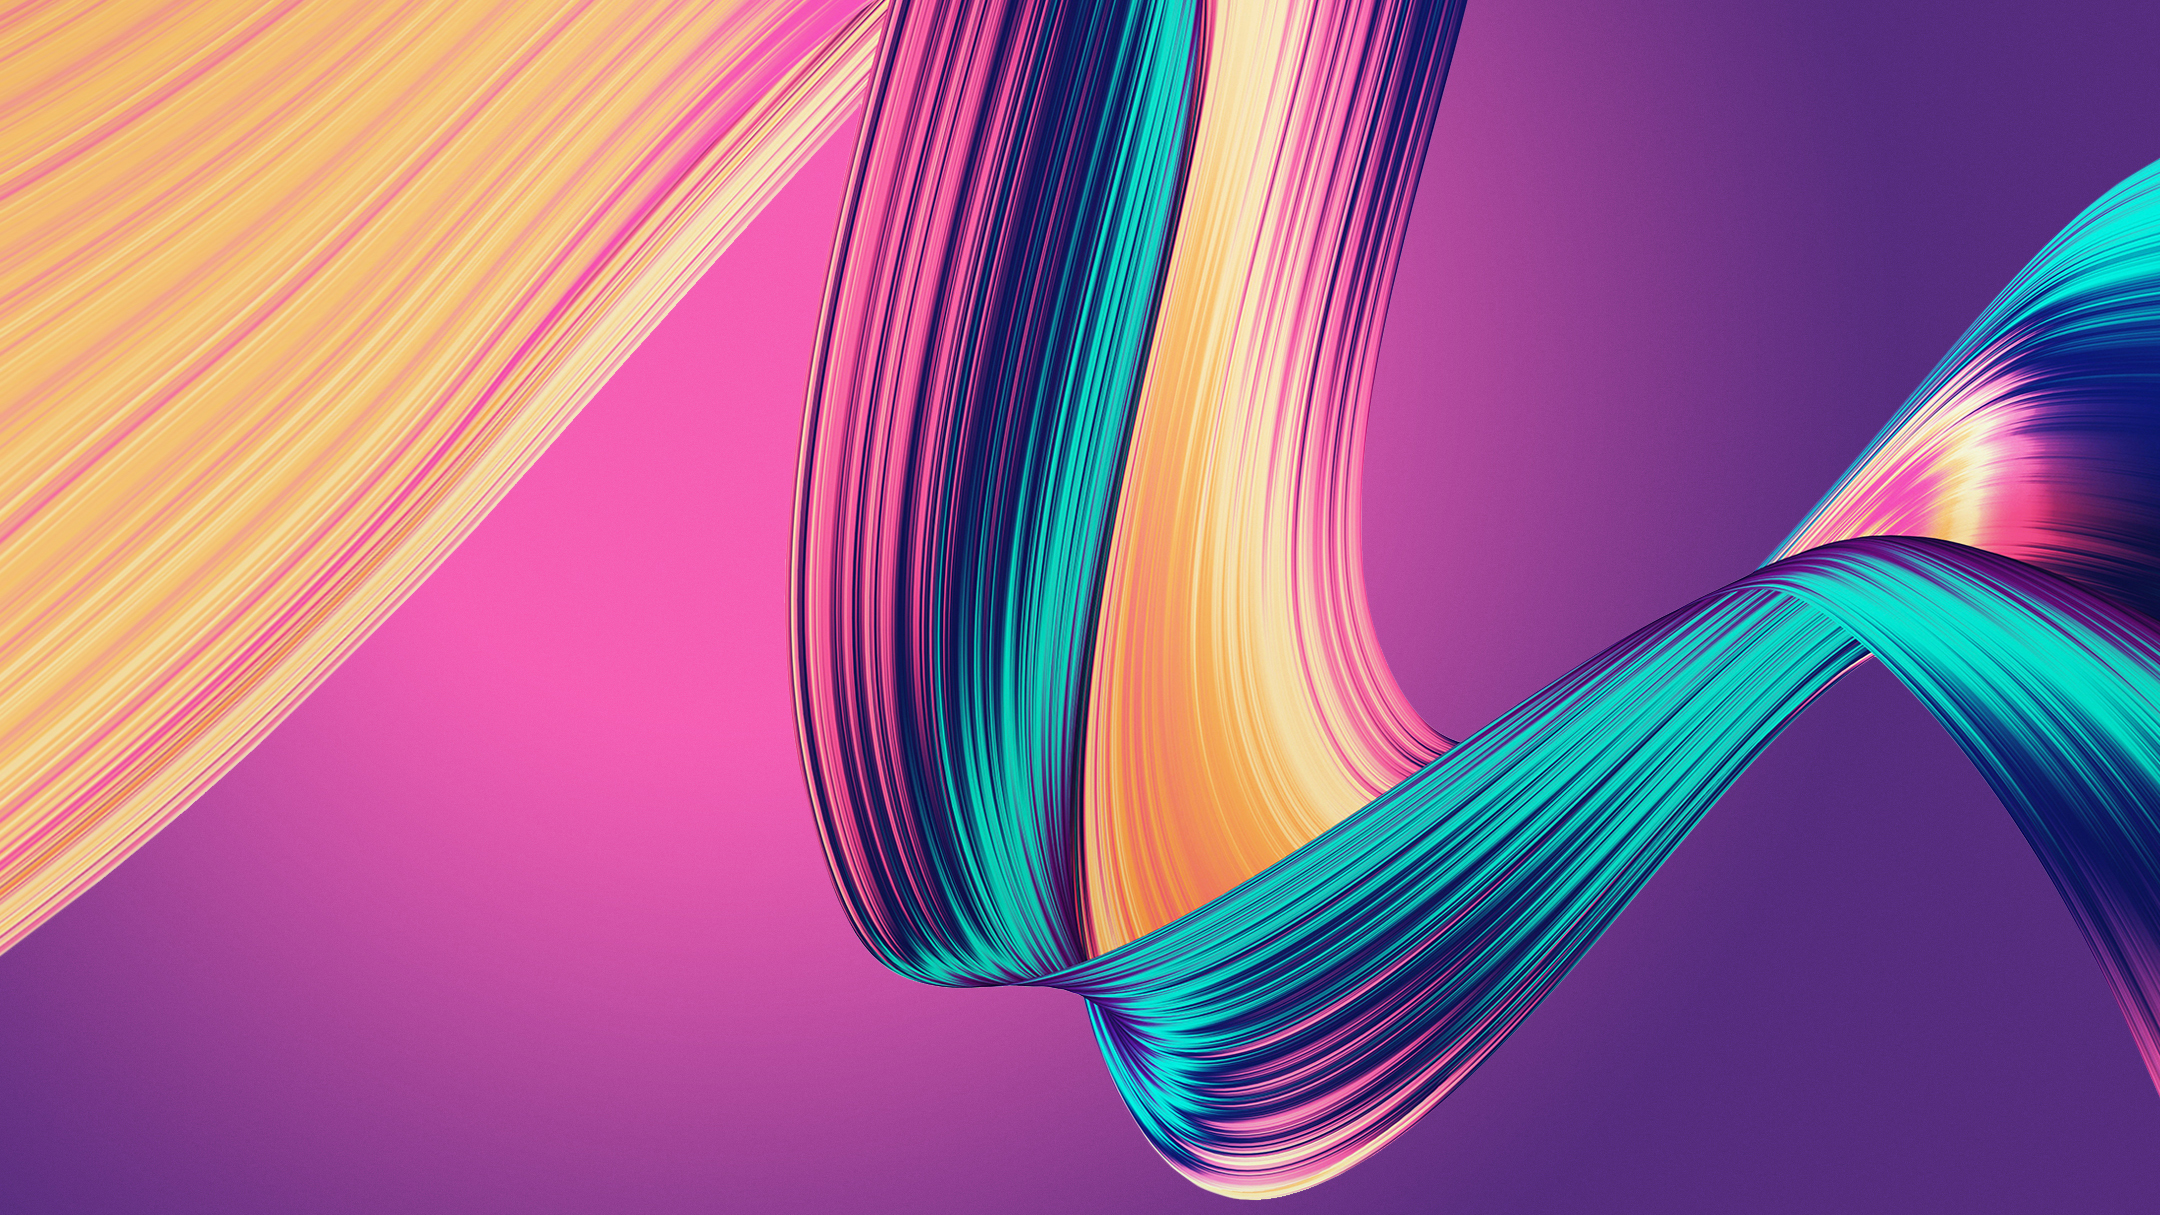 Neon Curves Honor Play Stock Wallpapers